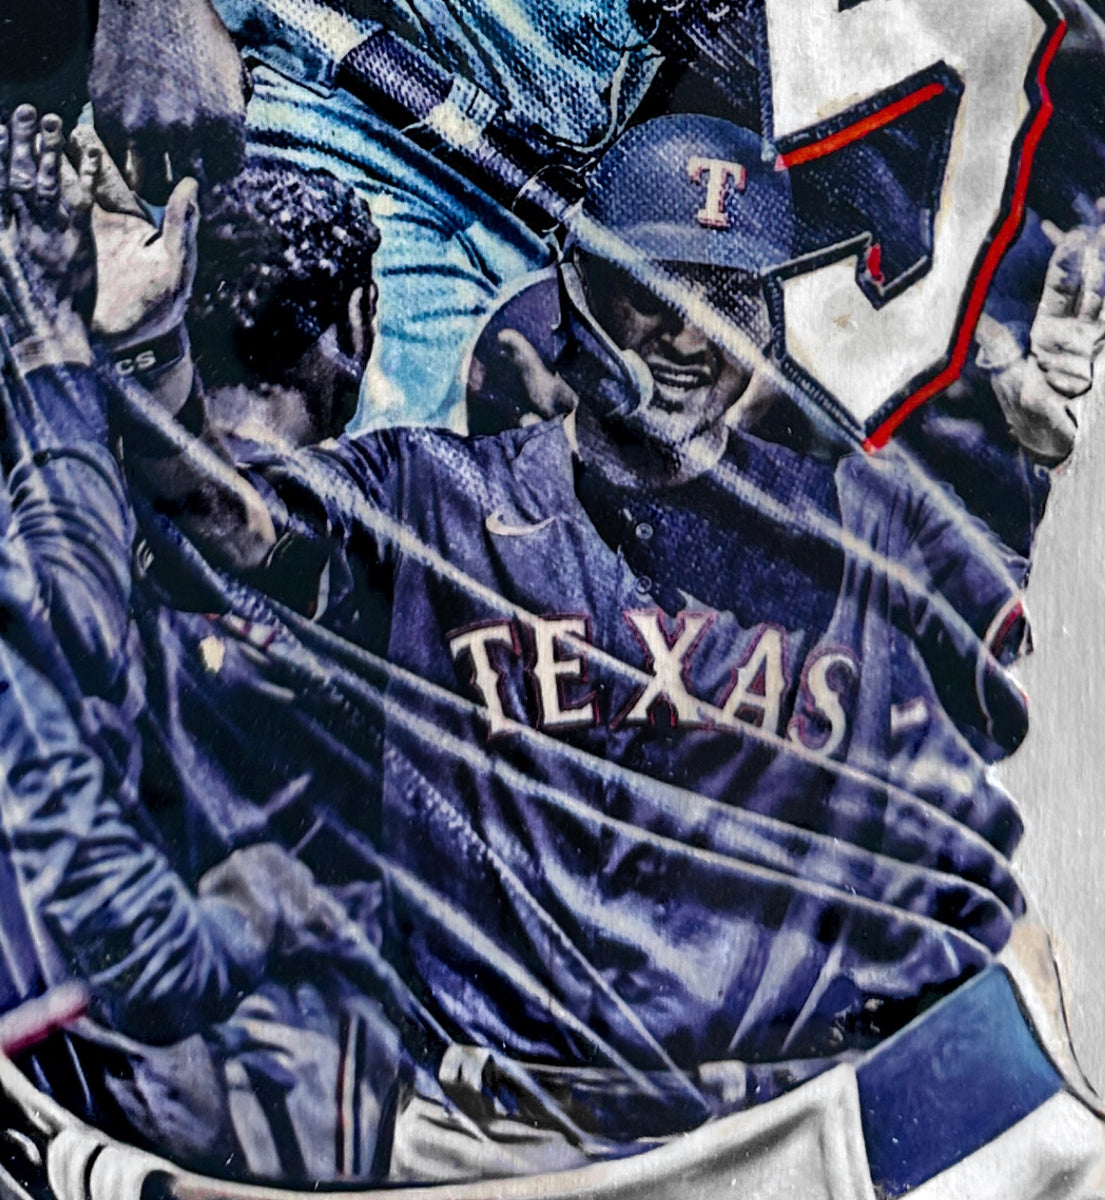 Texas Seager (Corey Seager) Texas Rangers - Officially Licensed MLB Print  - Limited Release /500